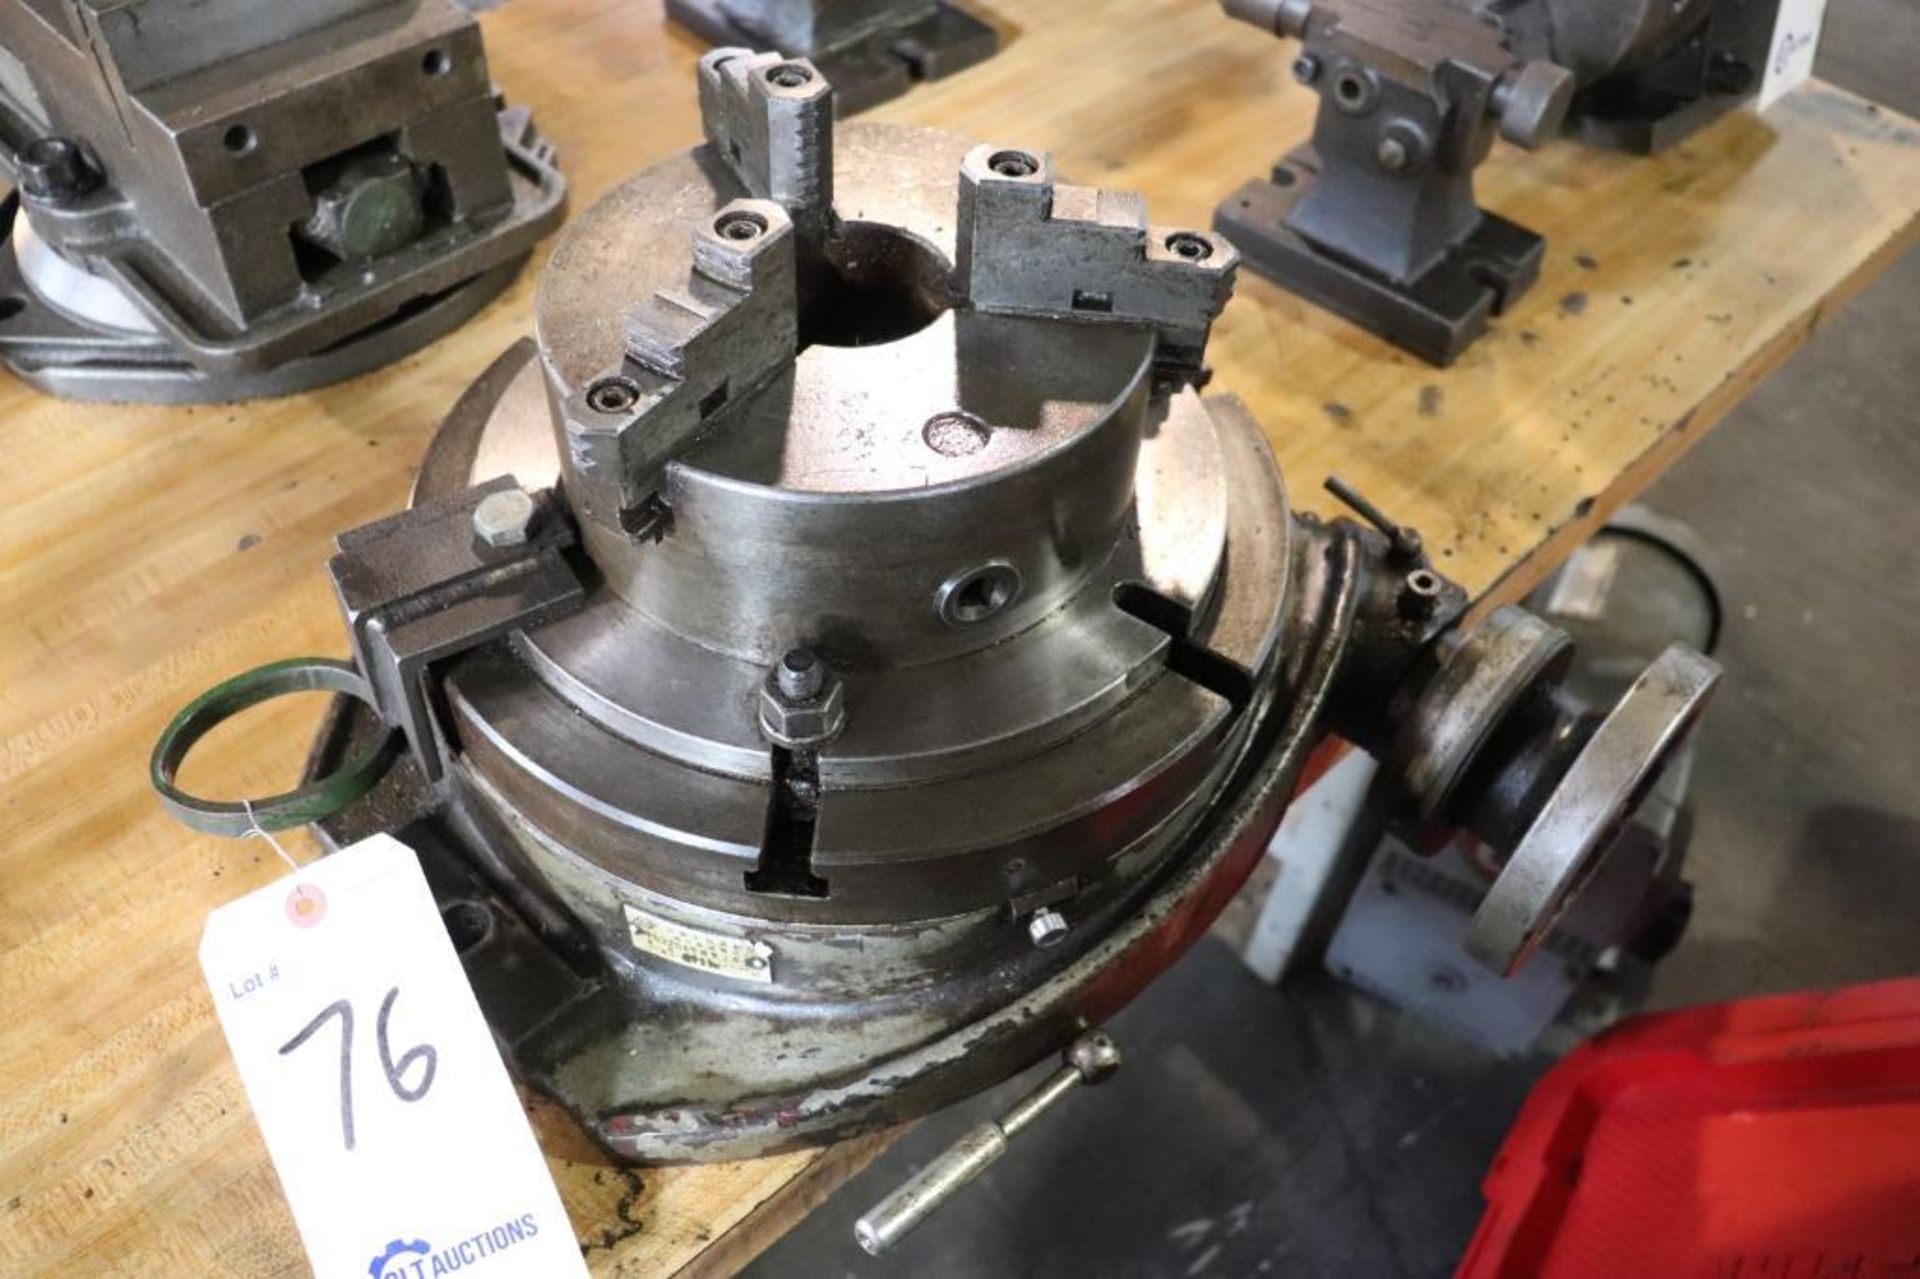 12" rotary table